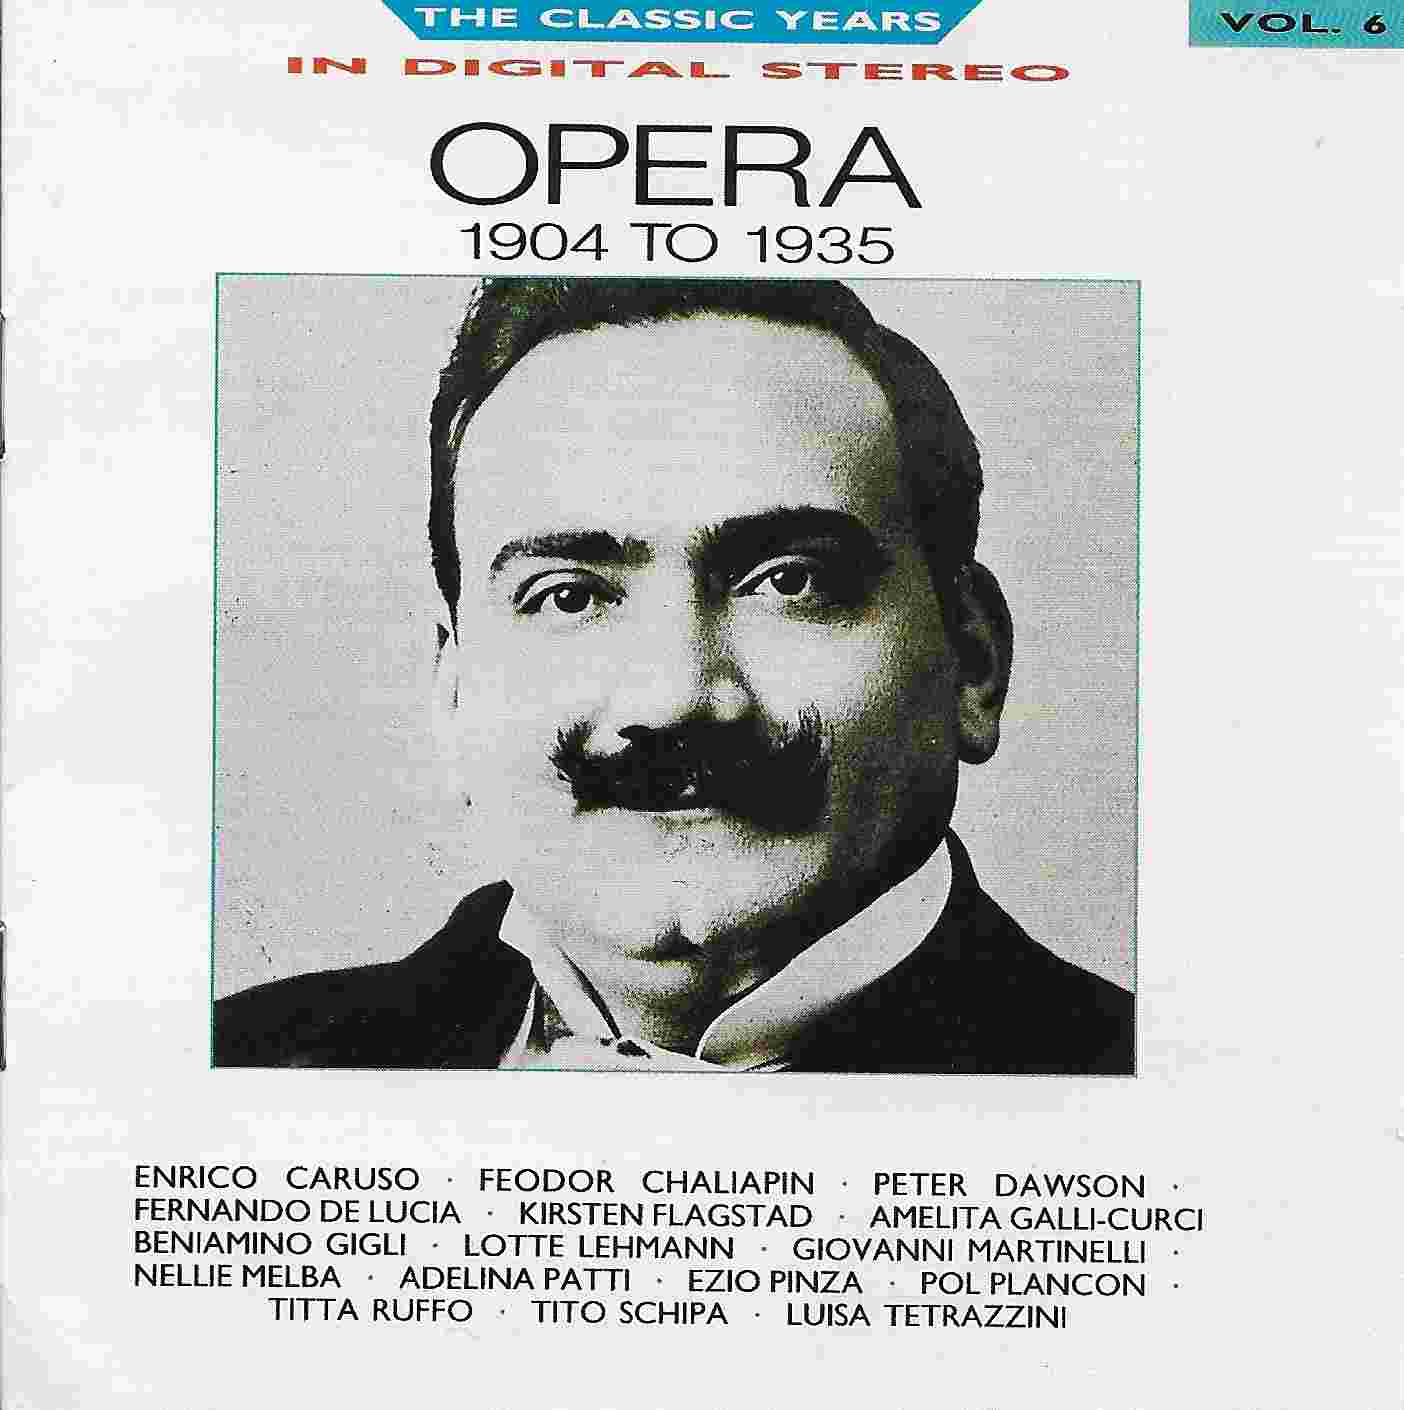 Picture of BBCCD653 Classic years - Volume 6, Opera by artist Various from the BBC cds - Records and Tapes library